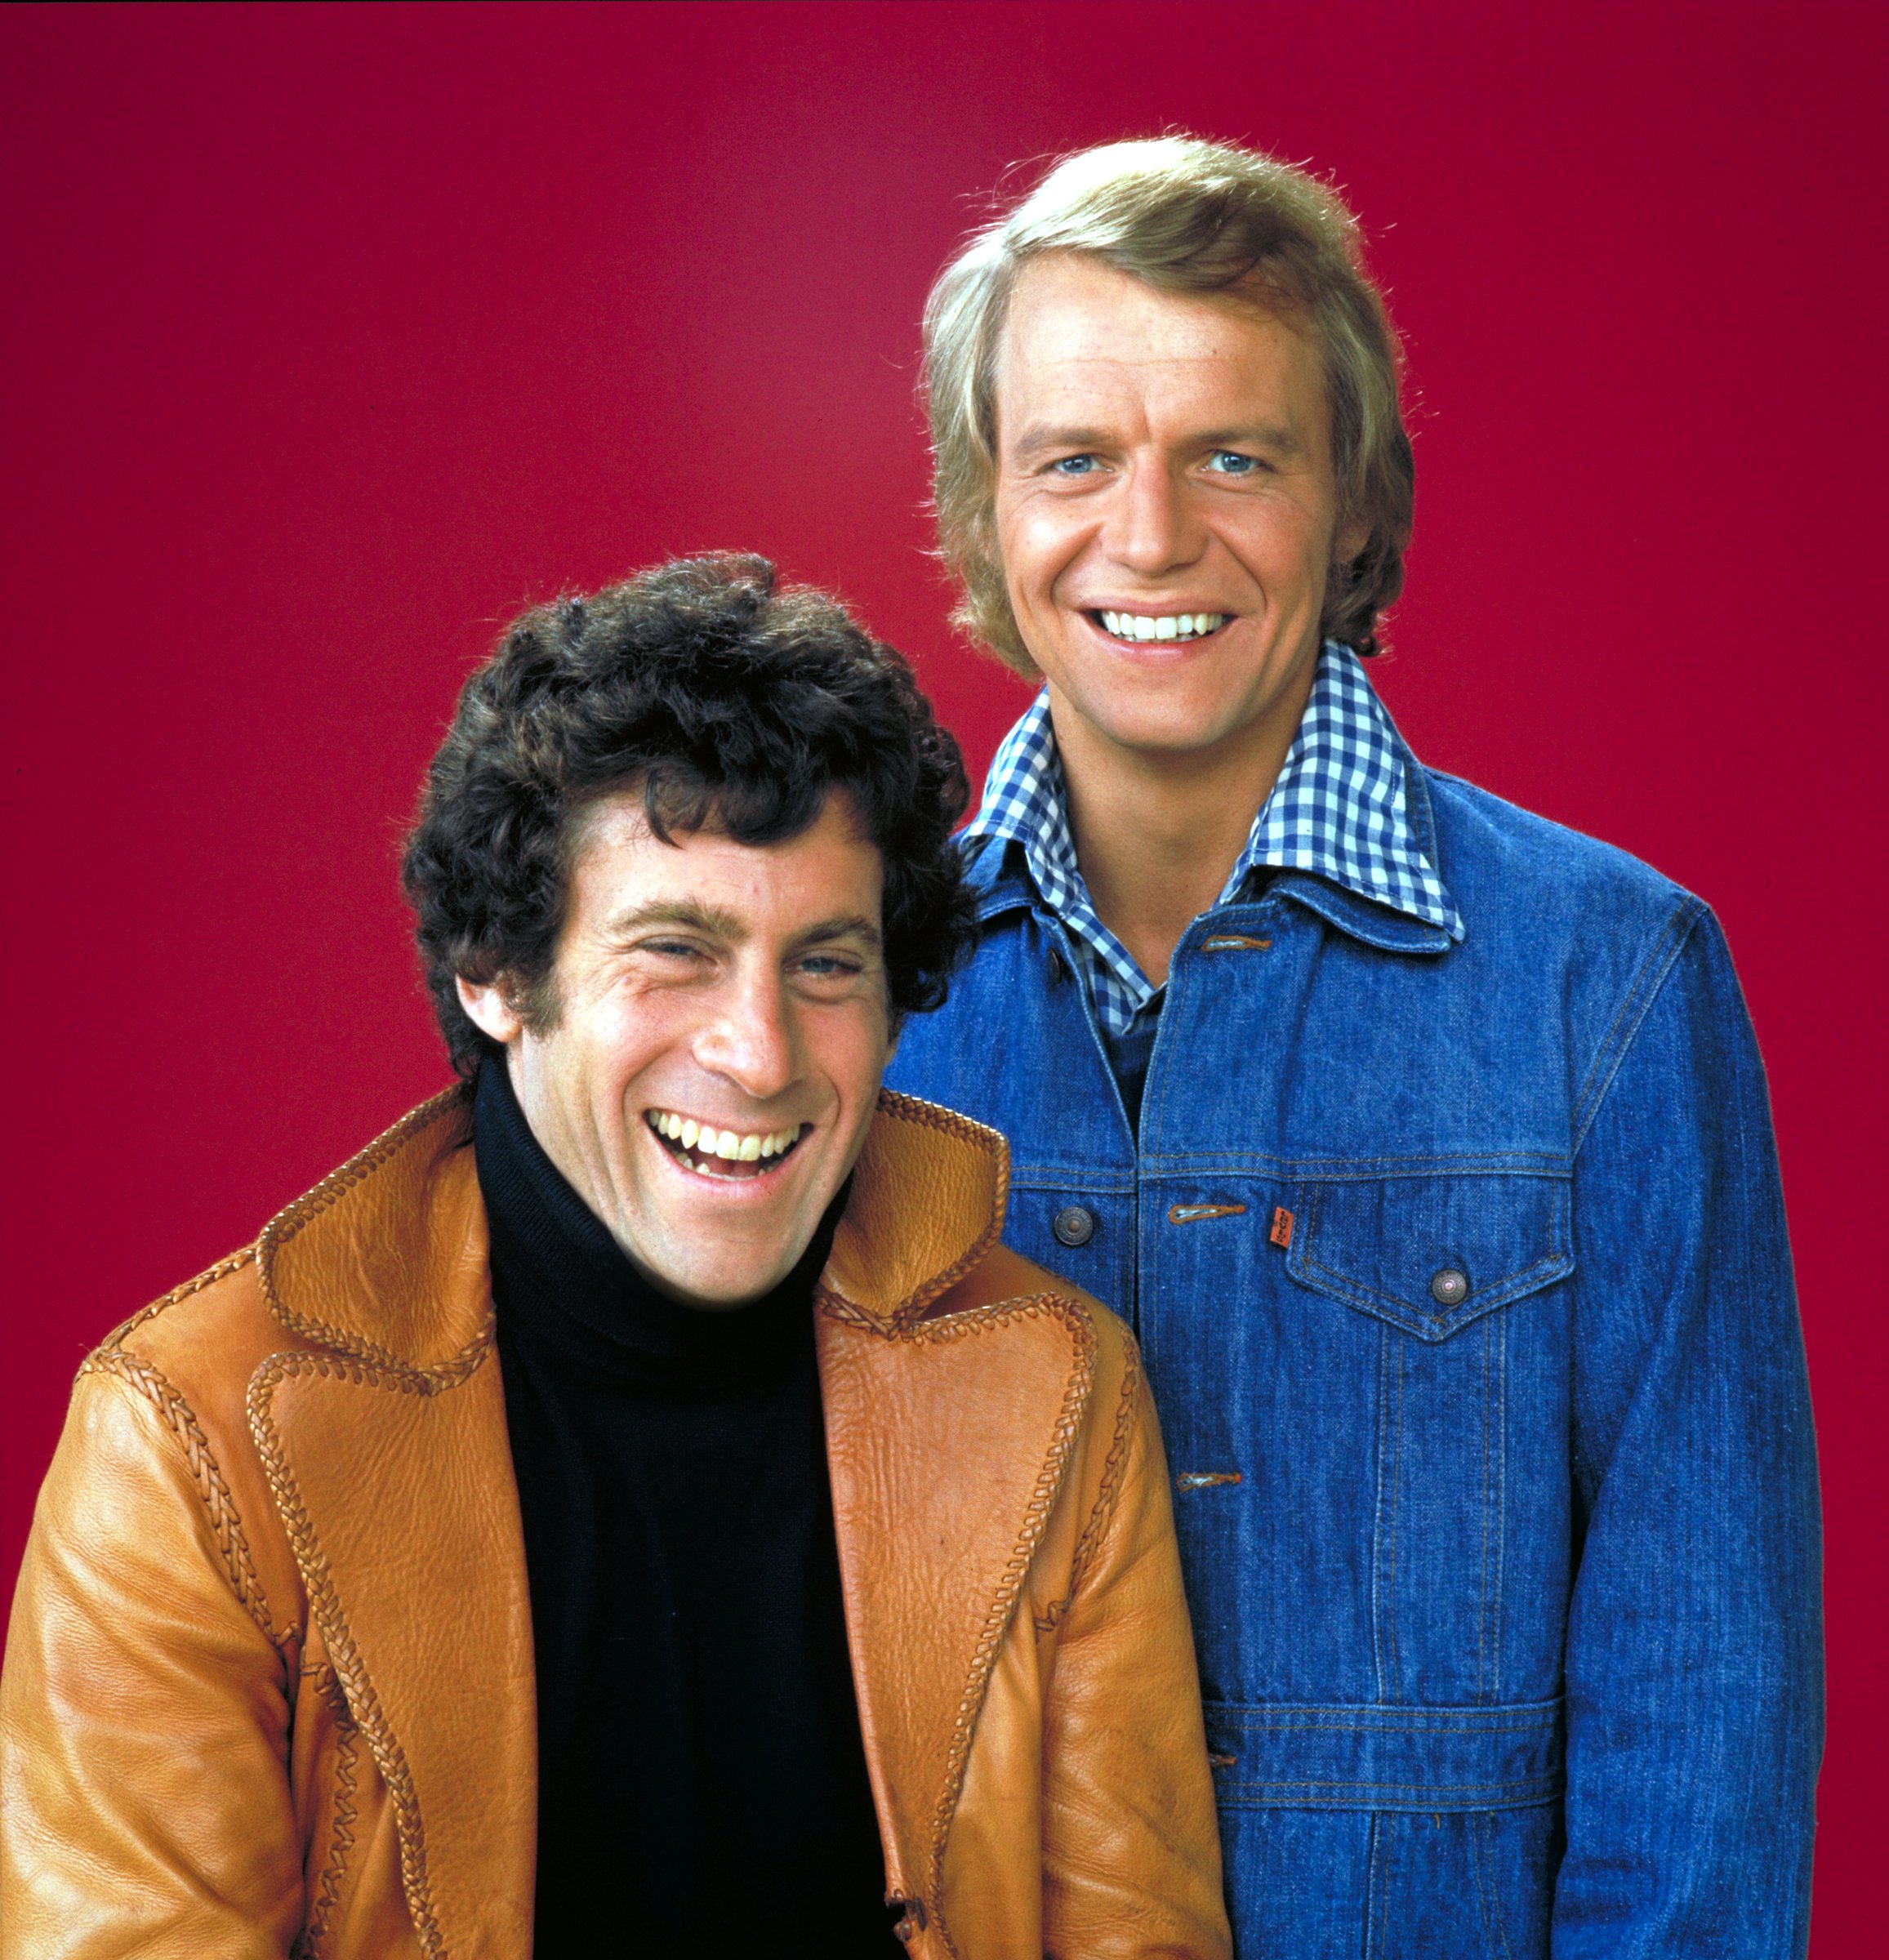 (L-R) Actors Paul Michael Glaser as David Starsky and David Soul as Kenneth "Hutch" Hutchinson in the drama series, "Starsky & Hutch" on June 16, 1975 | Source: Getty Images